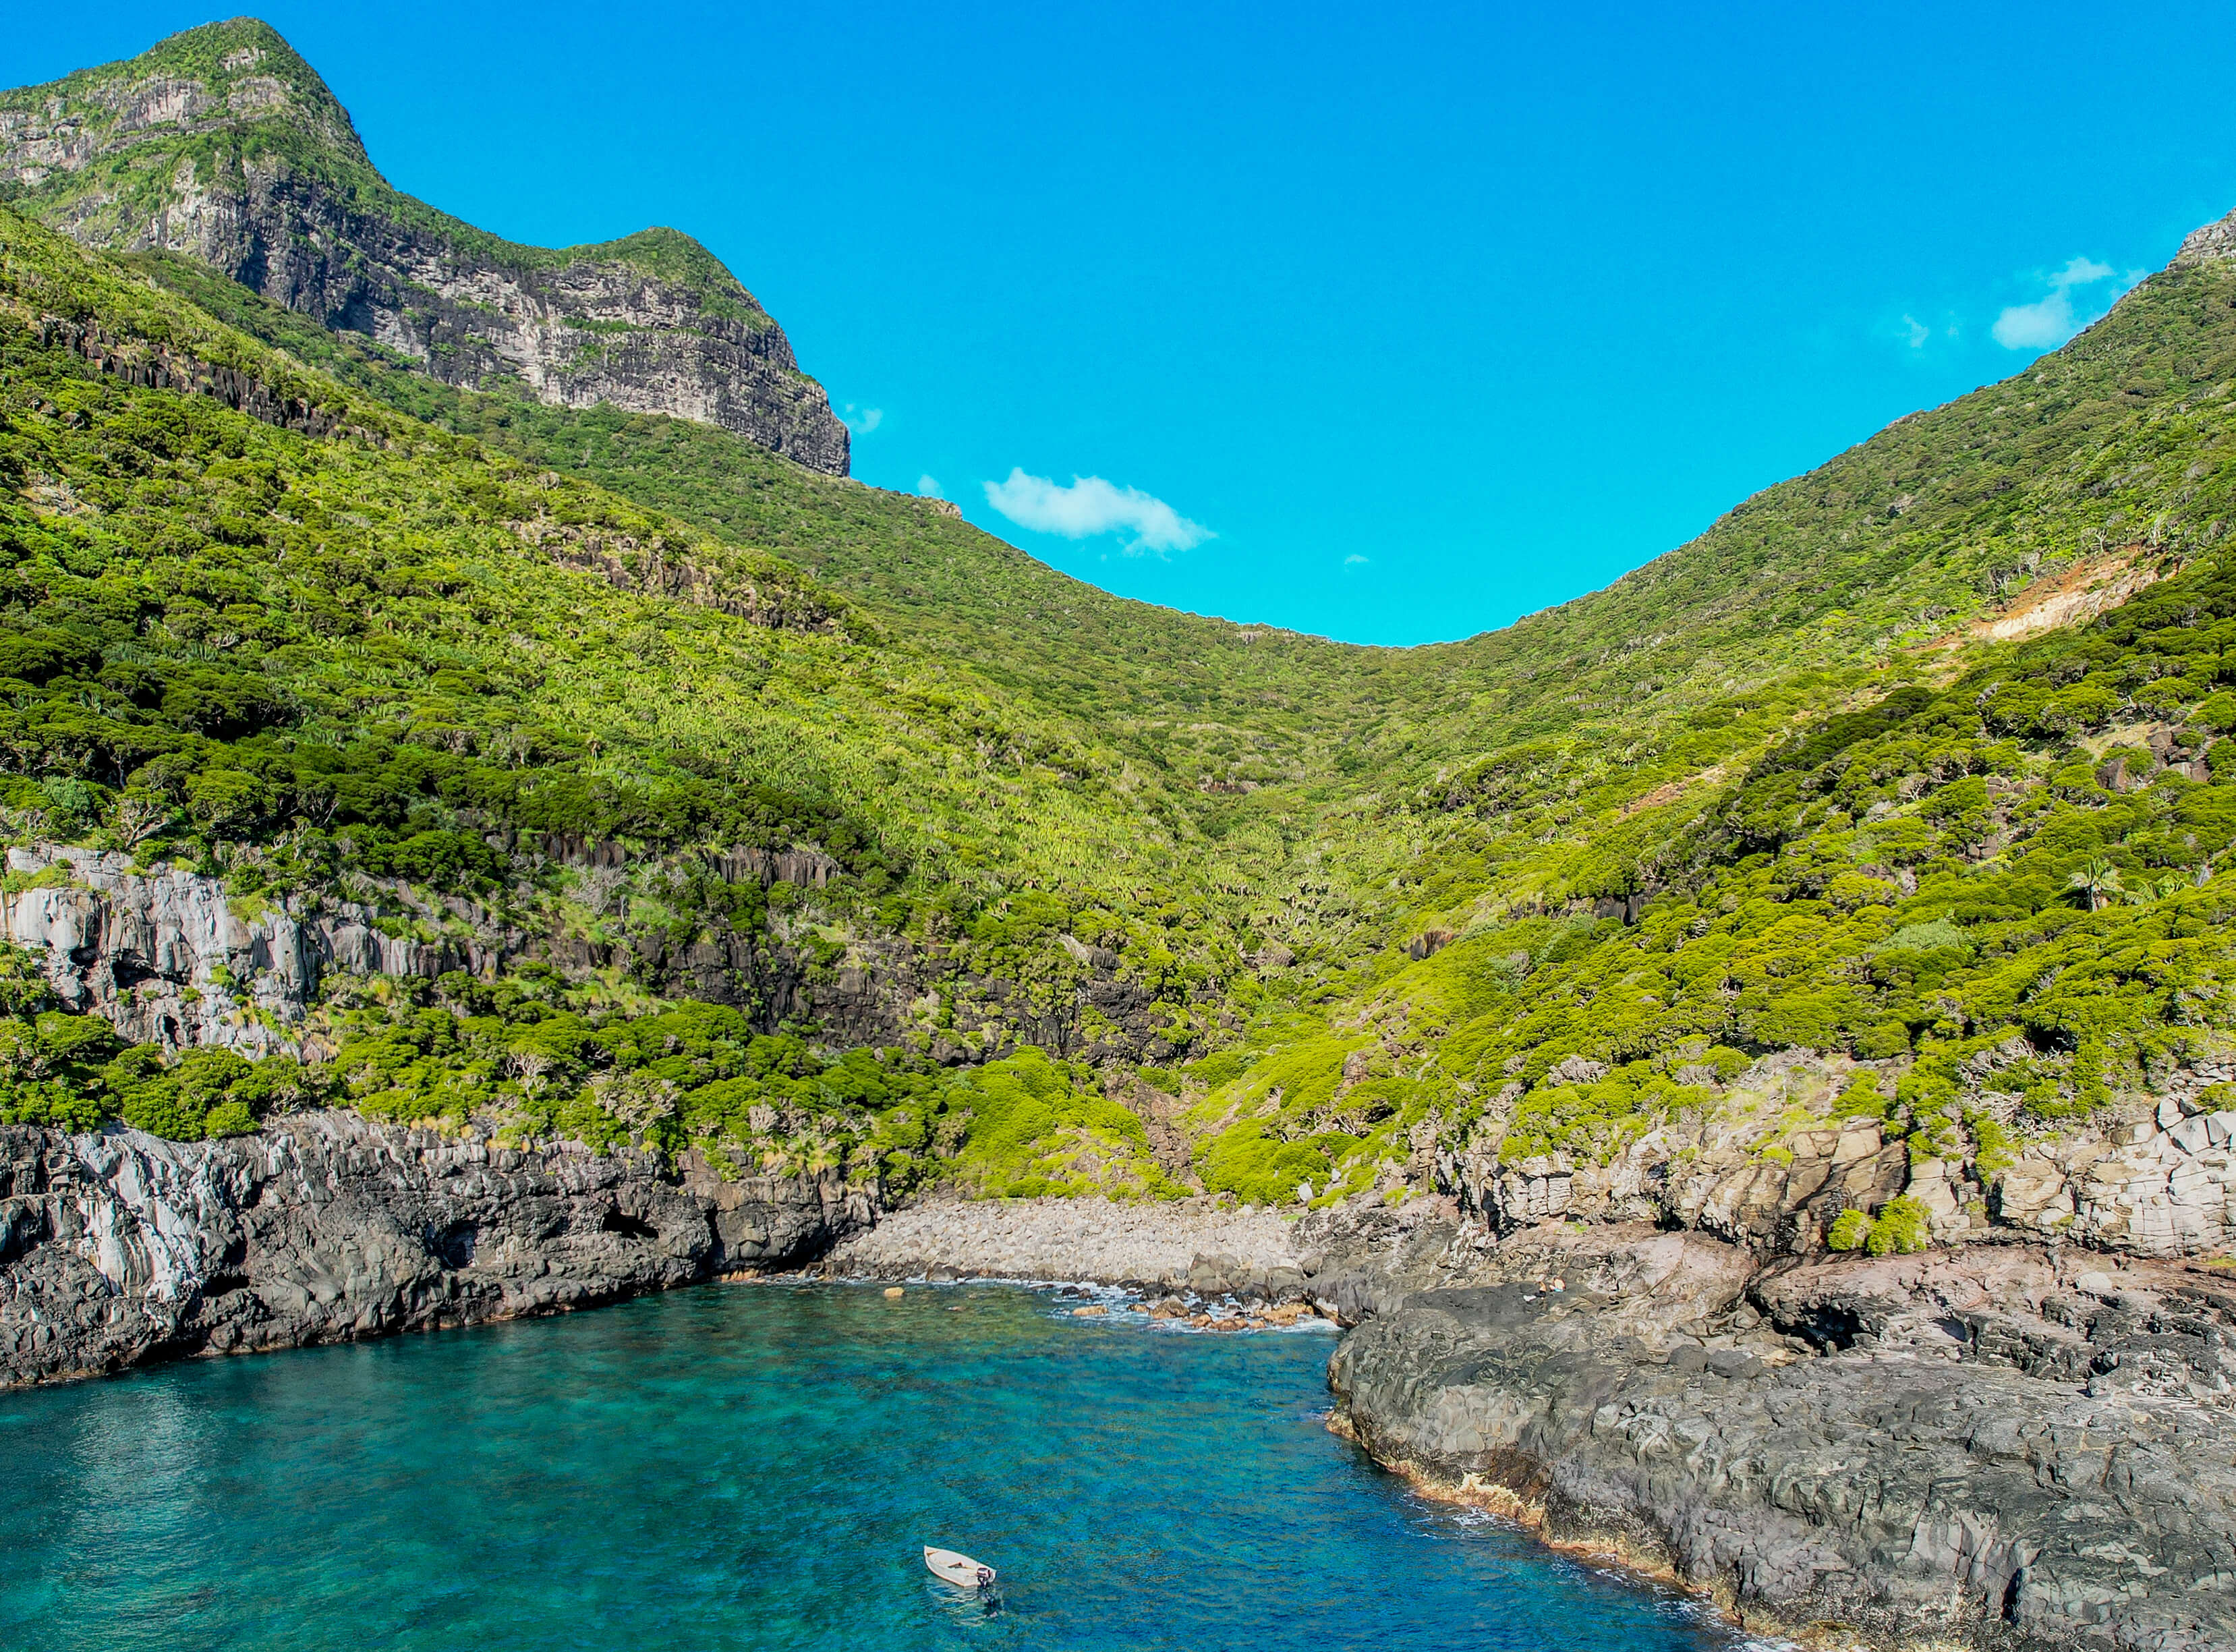 Ocean opening up to a valley on Lord Howe Island